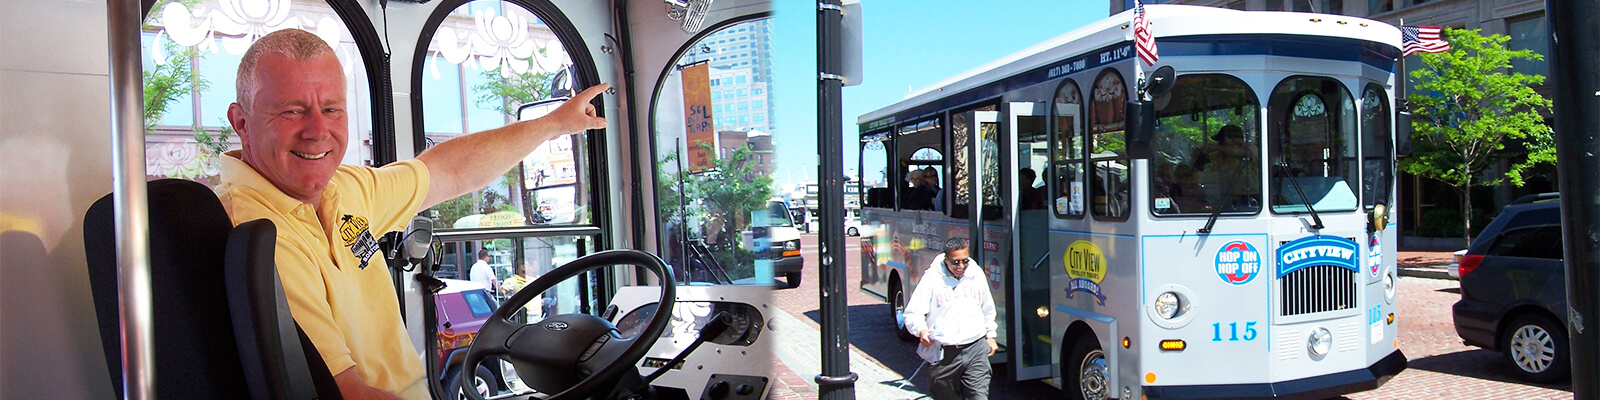 CityView Trolley Tours Coupons